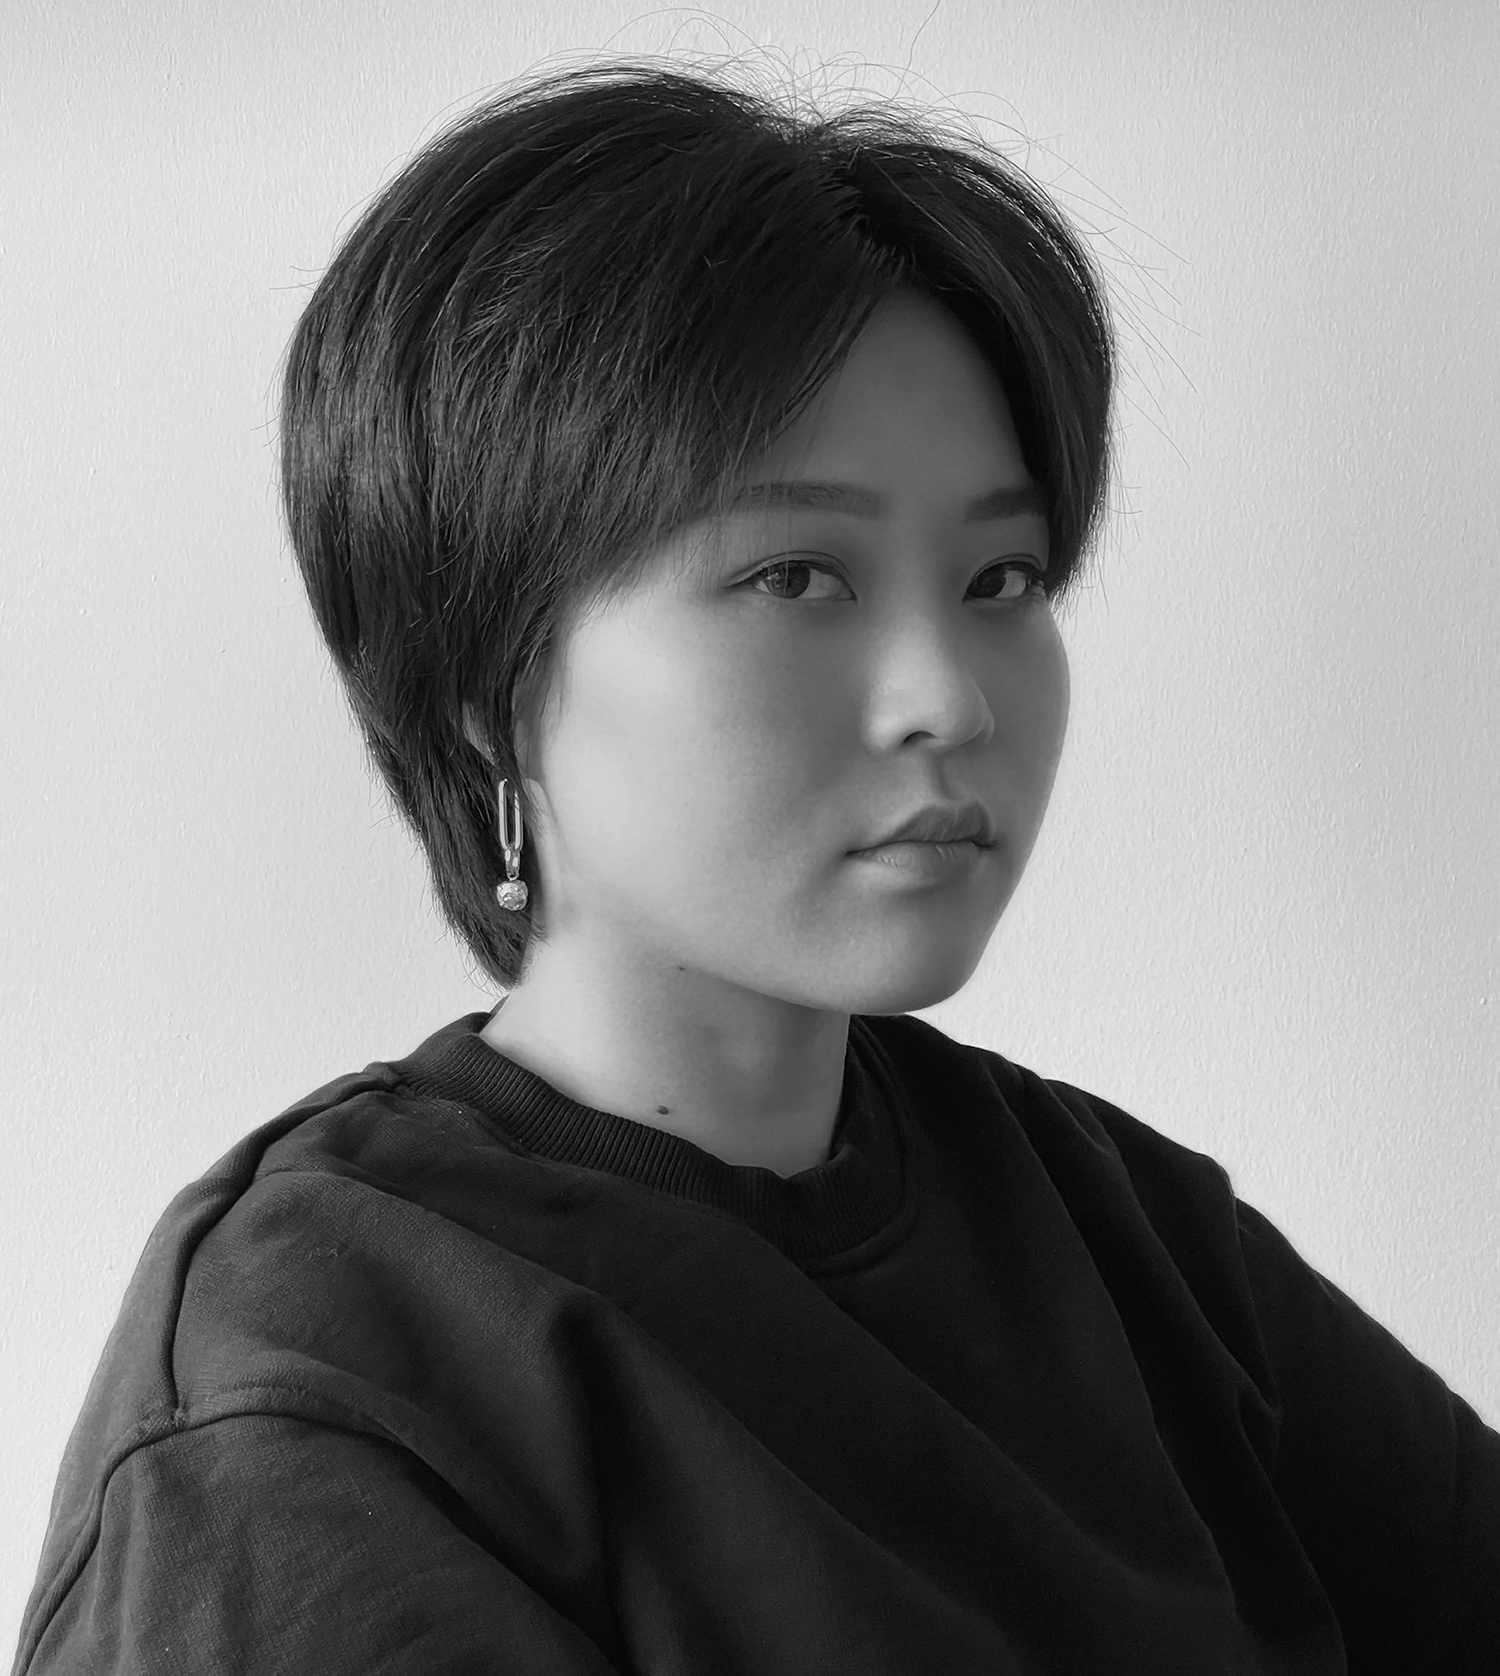 Black & white picture of a young Asian woman with short hair wearing earings and a pullover, looking directly at the camera.